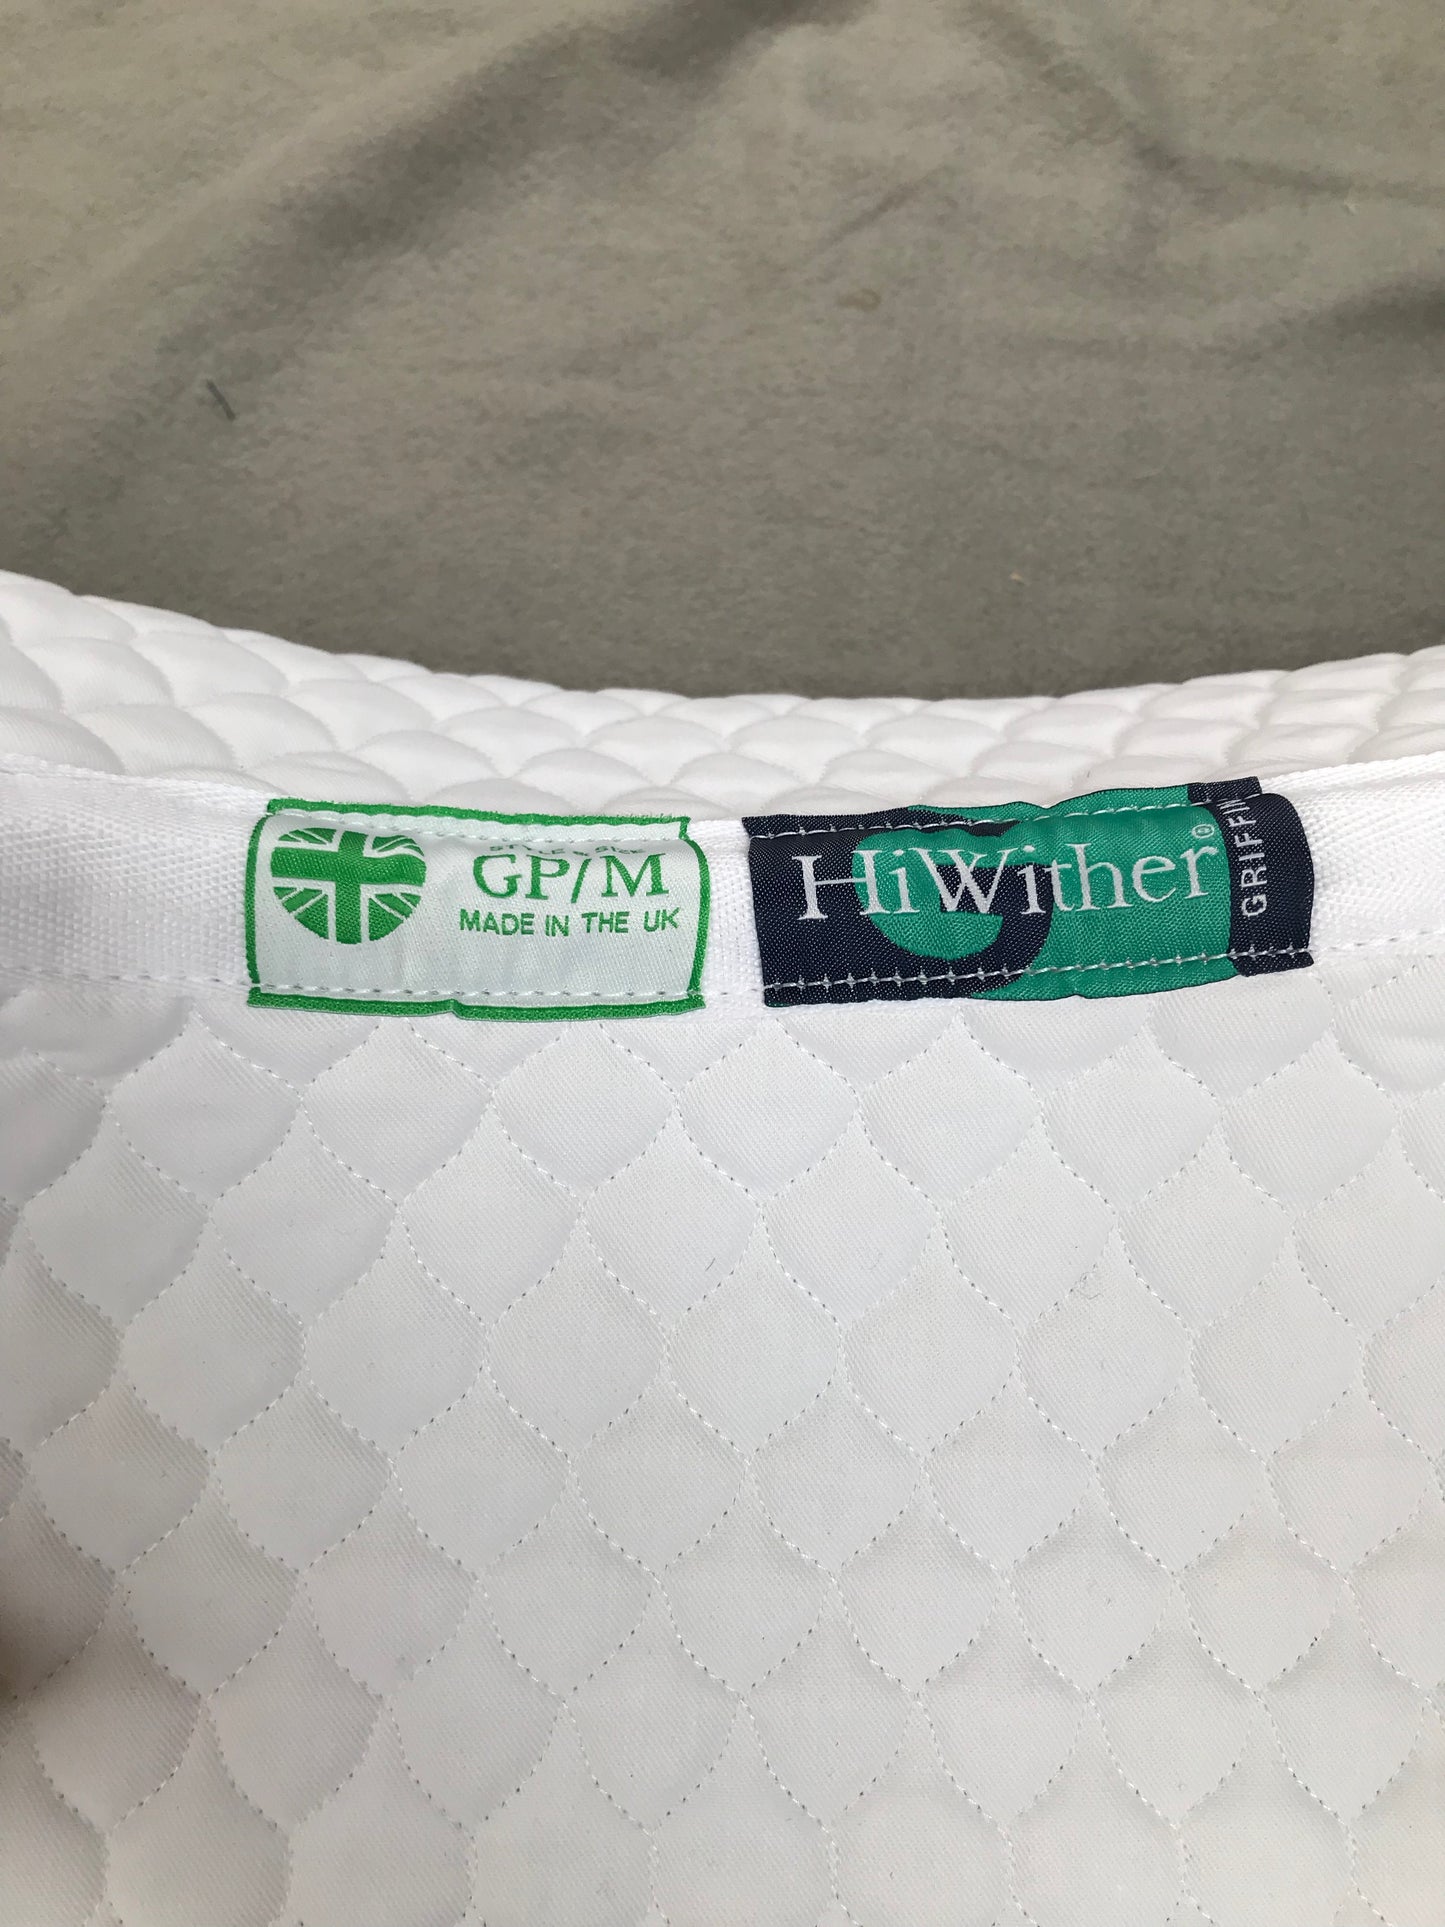 New white griffin hiwither saddle cloth FREE POSTAGE*